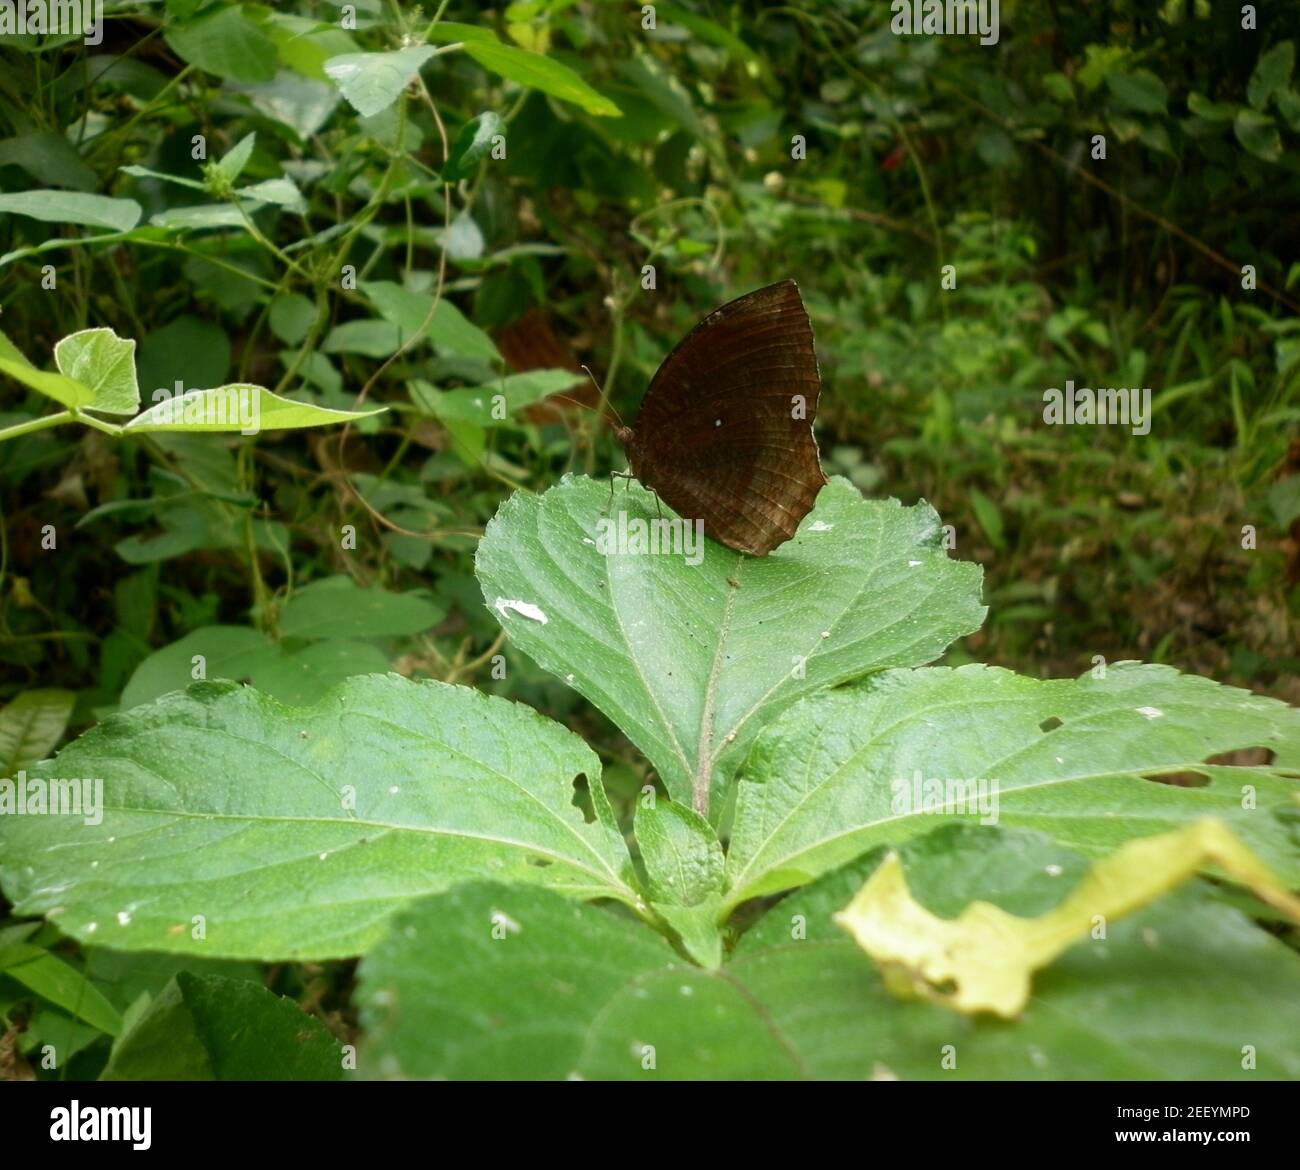 A common palm fly butterfly sitting on medium size leaf Stock Photo